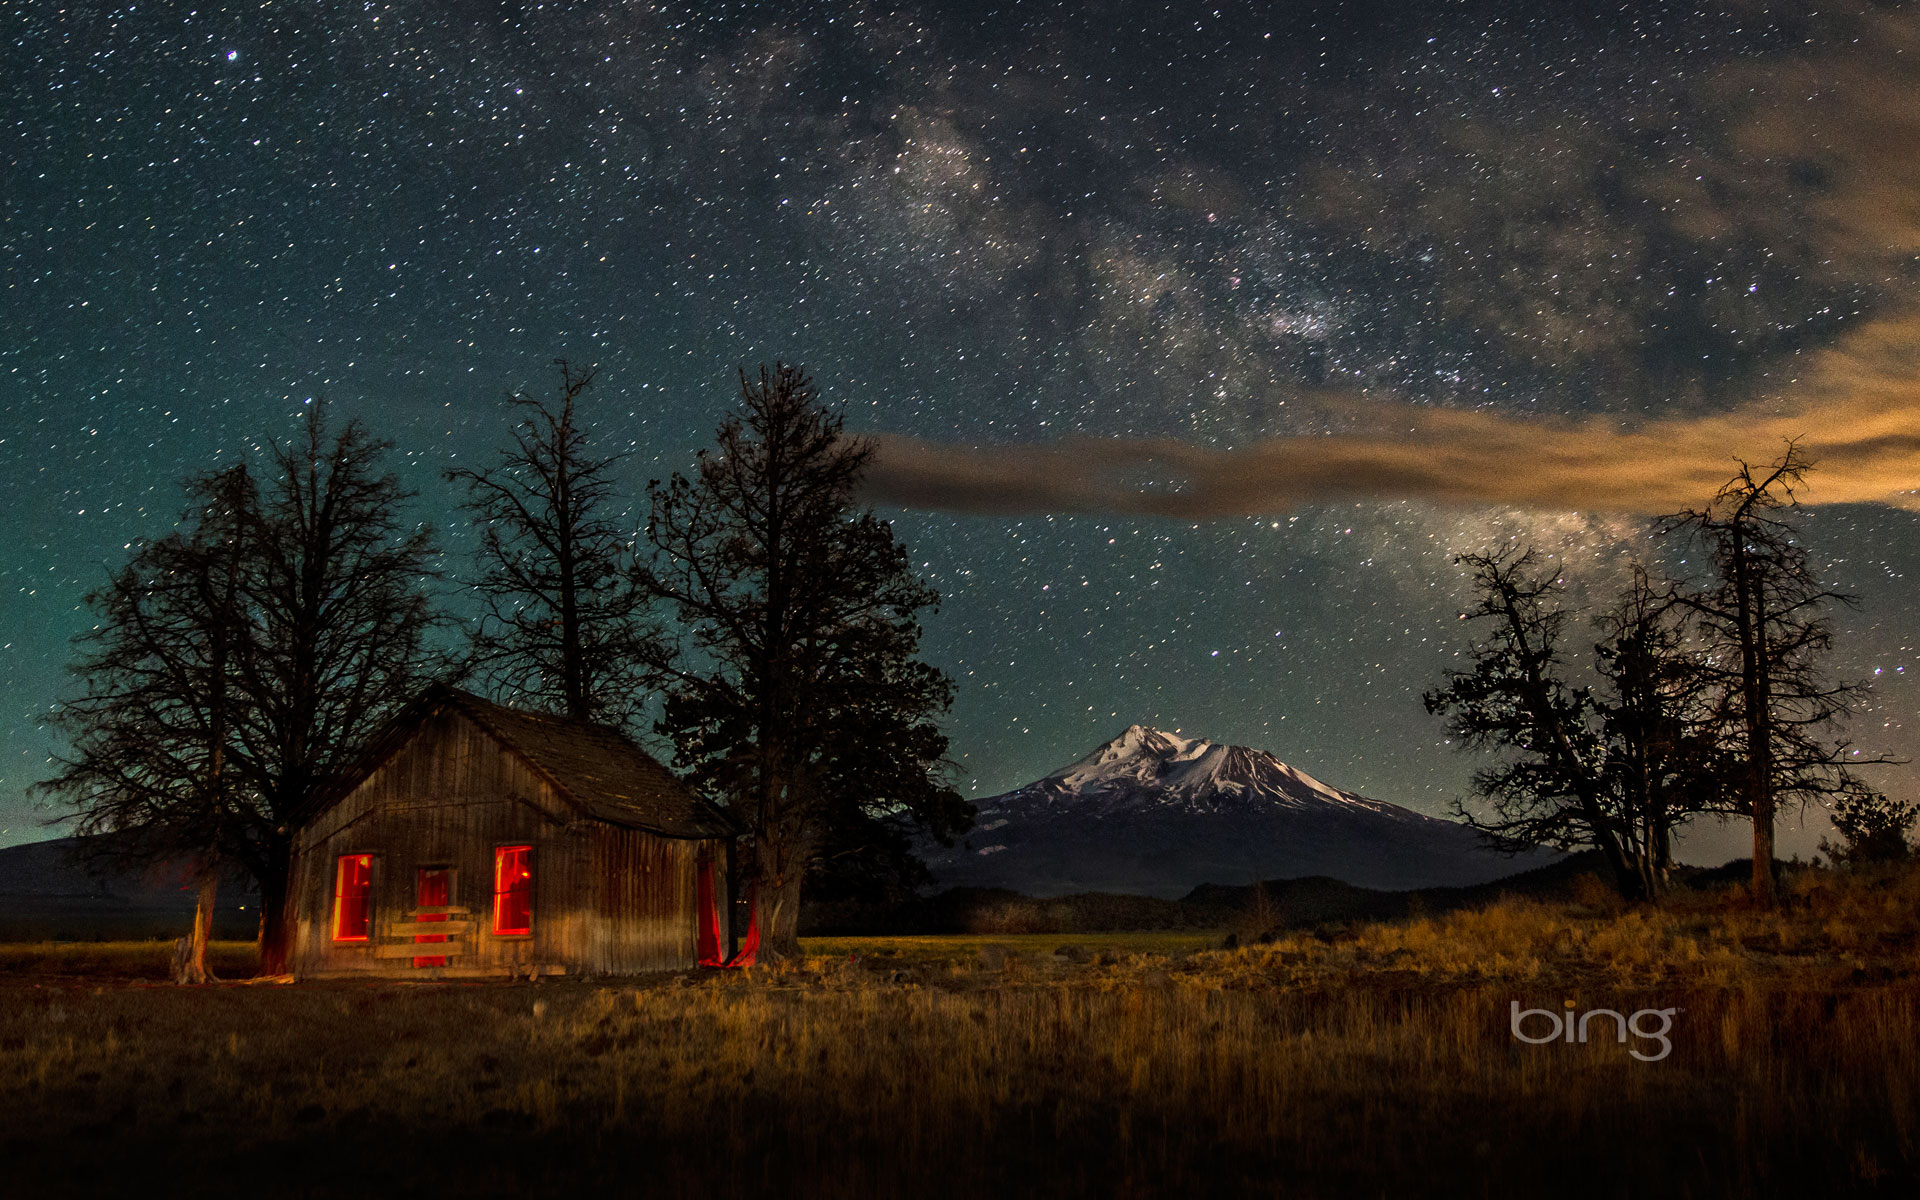 mount shasta at night with the milky way above